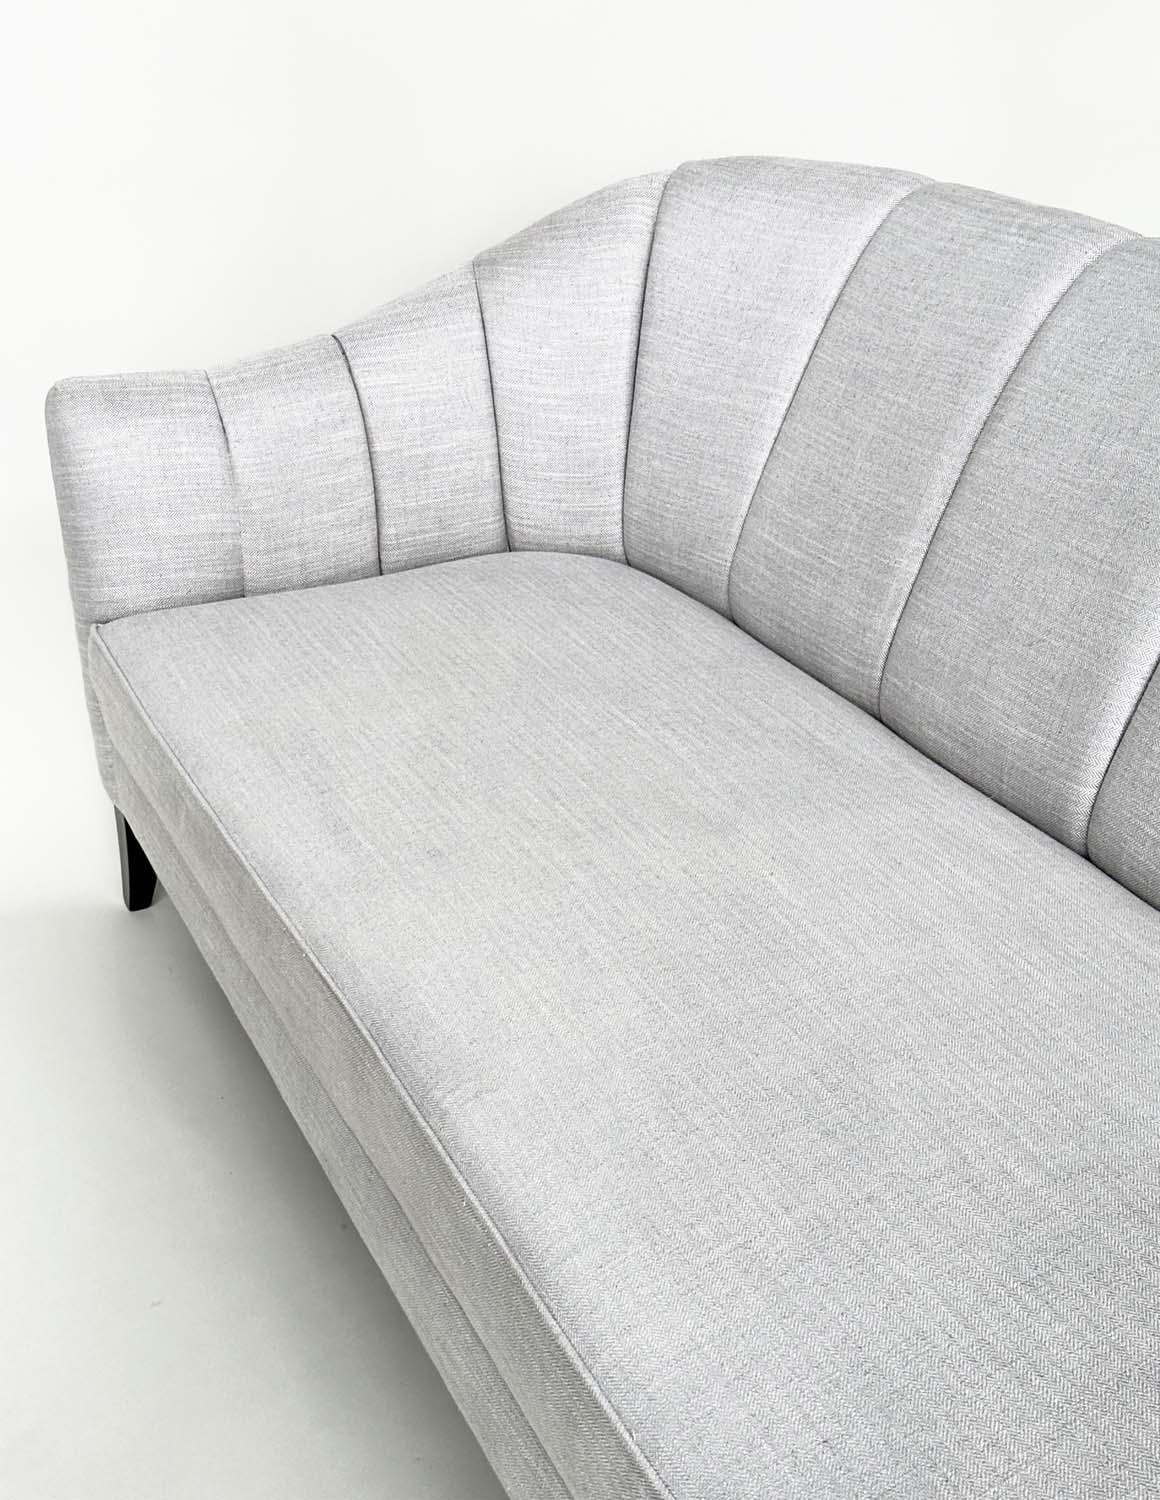 BRAY DESIGN SOFA, ribbed curved back and out swept supports, in Sahco Flint fabric upholstery, 210cm - Image 9 of 11